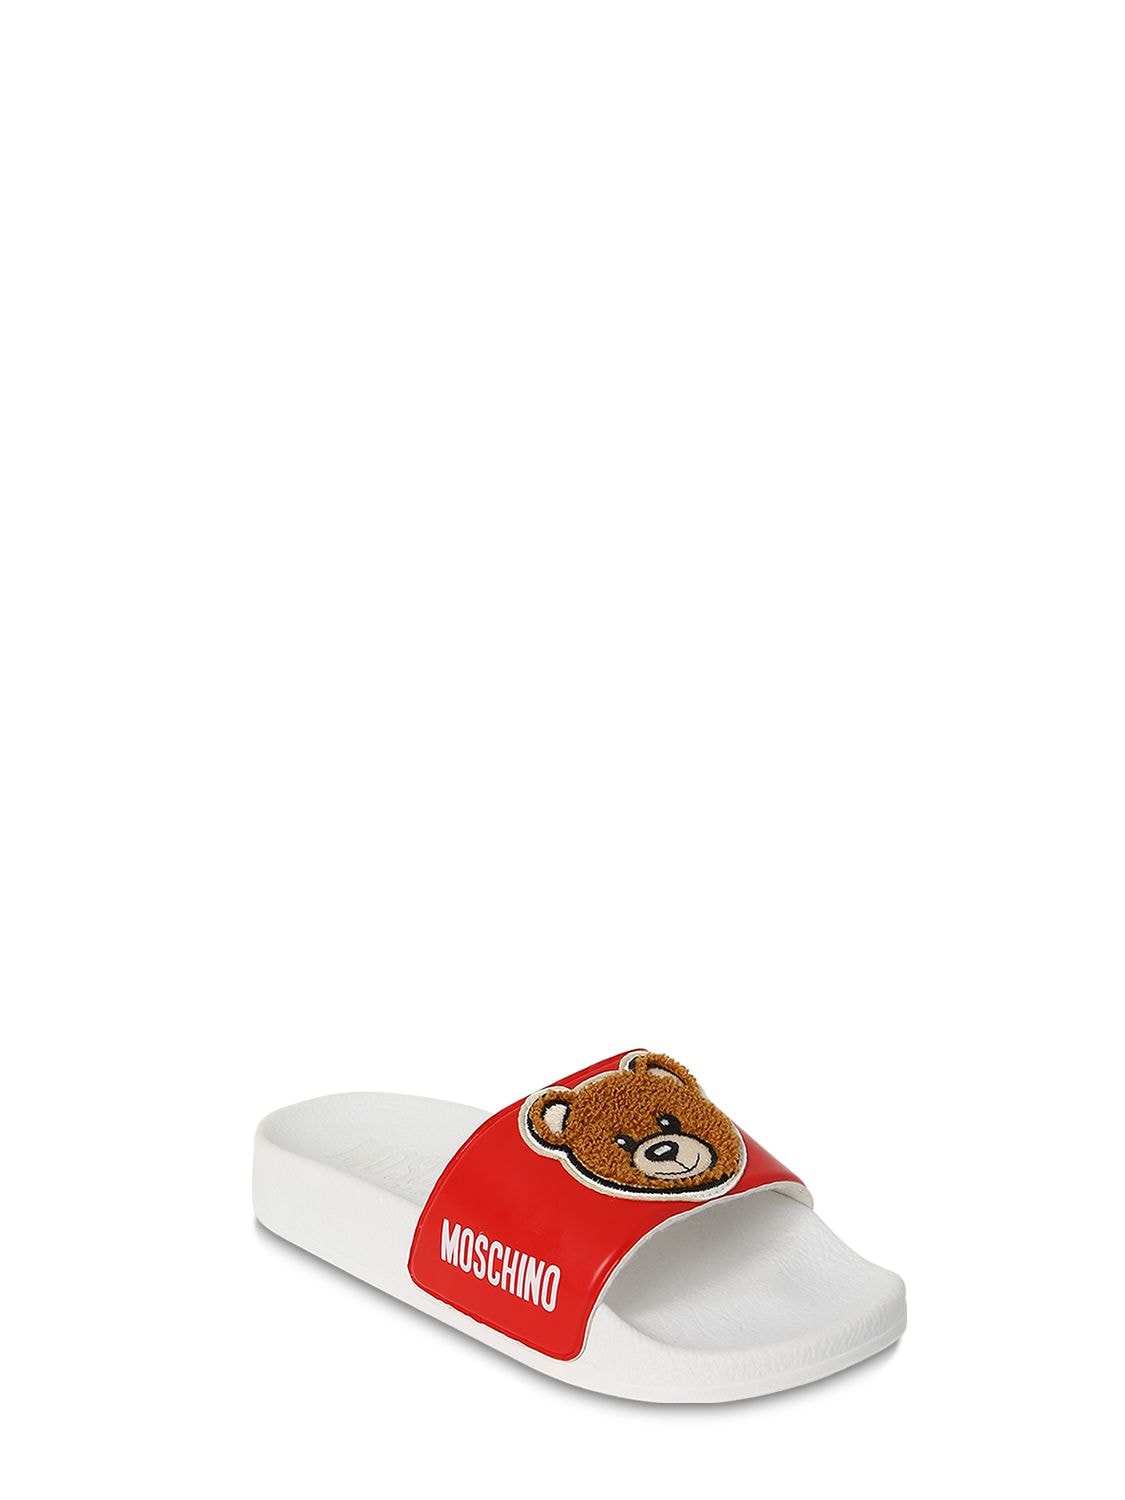 Moschino Kids' Teddy Bear Rubber Slide Sandals In Red